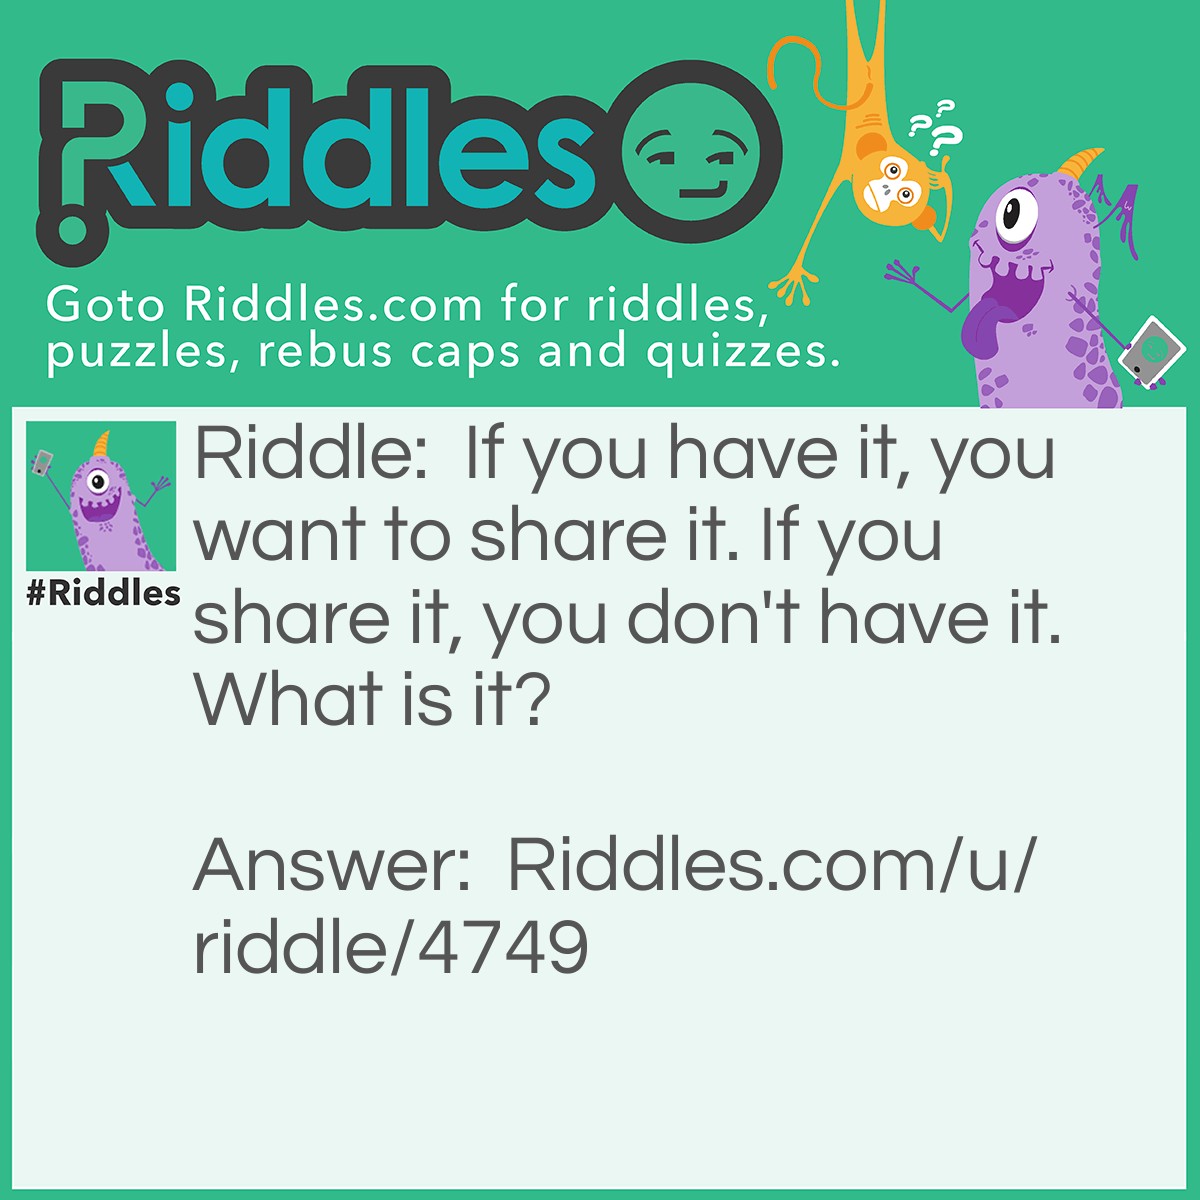 Riddle: If you have it, you want to share it. If you share it, you don't have it. What is it? Answer: A secret.